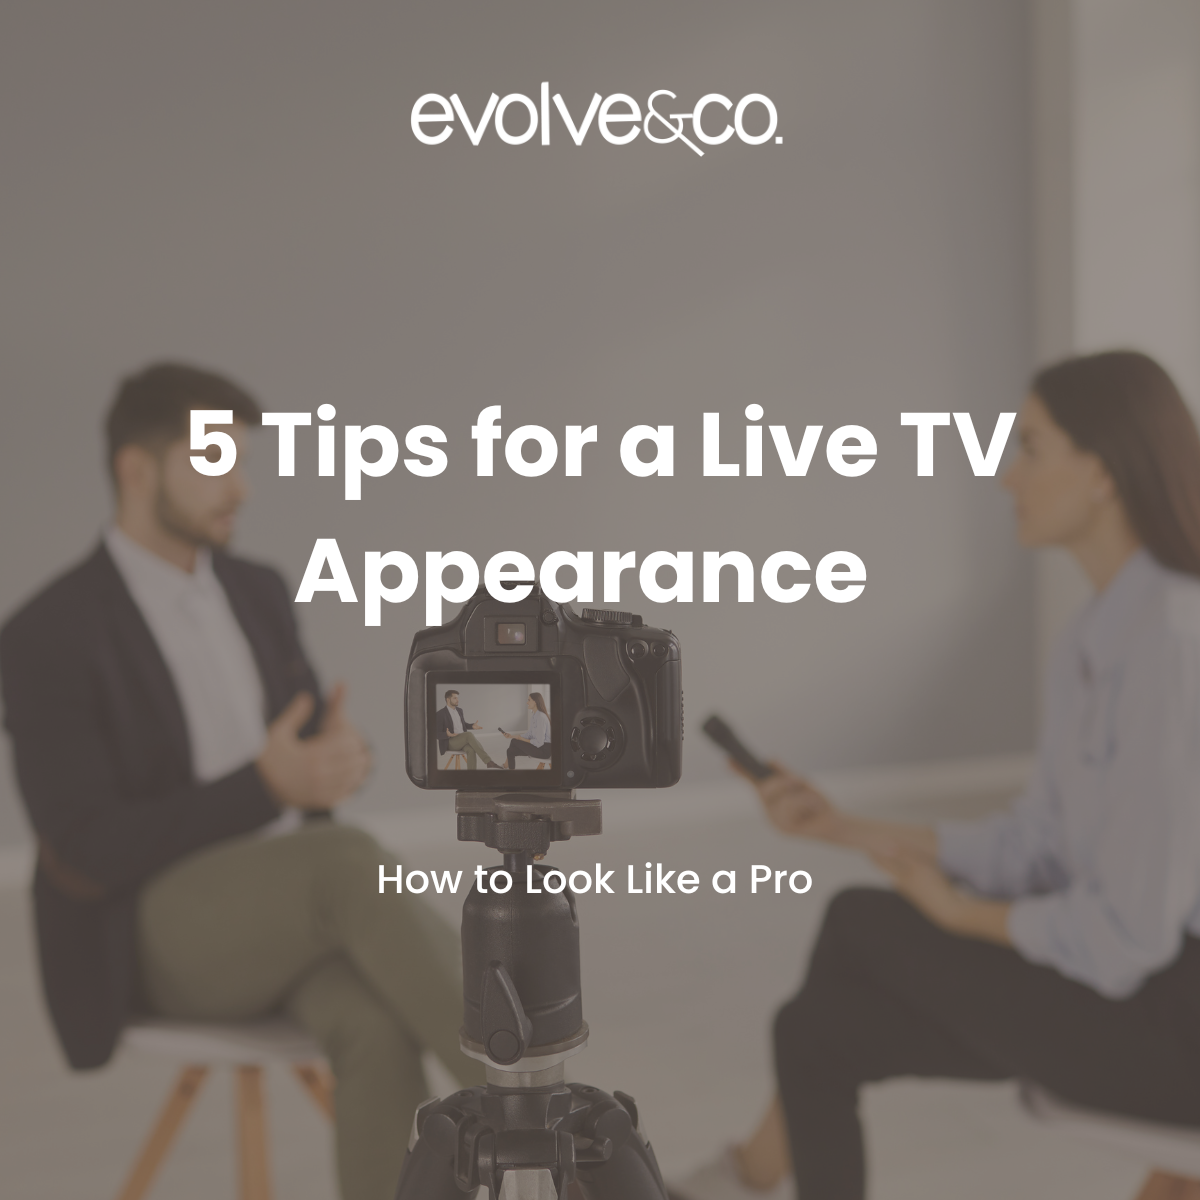 5 Tips for a Live TV Appearance